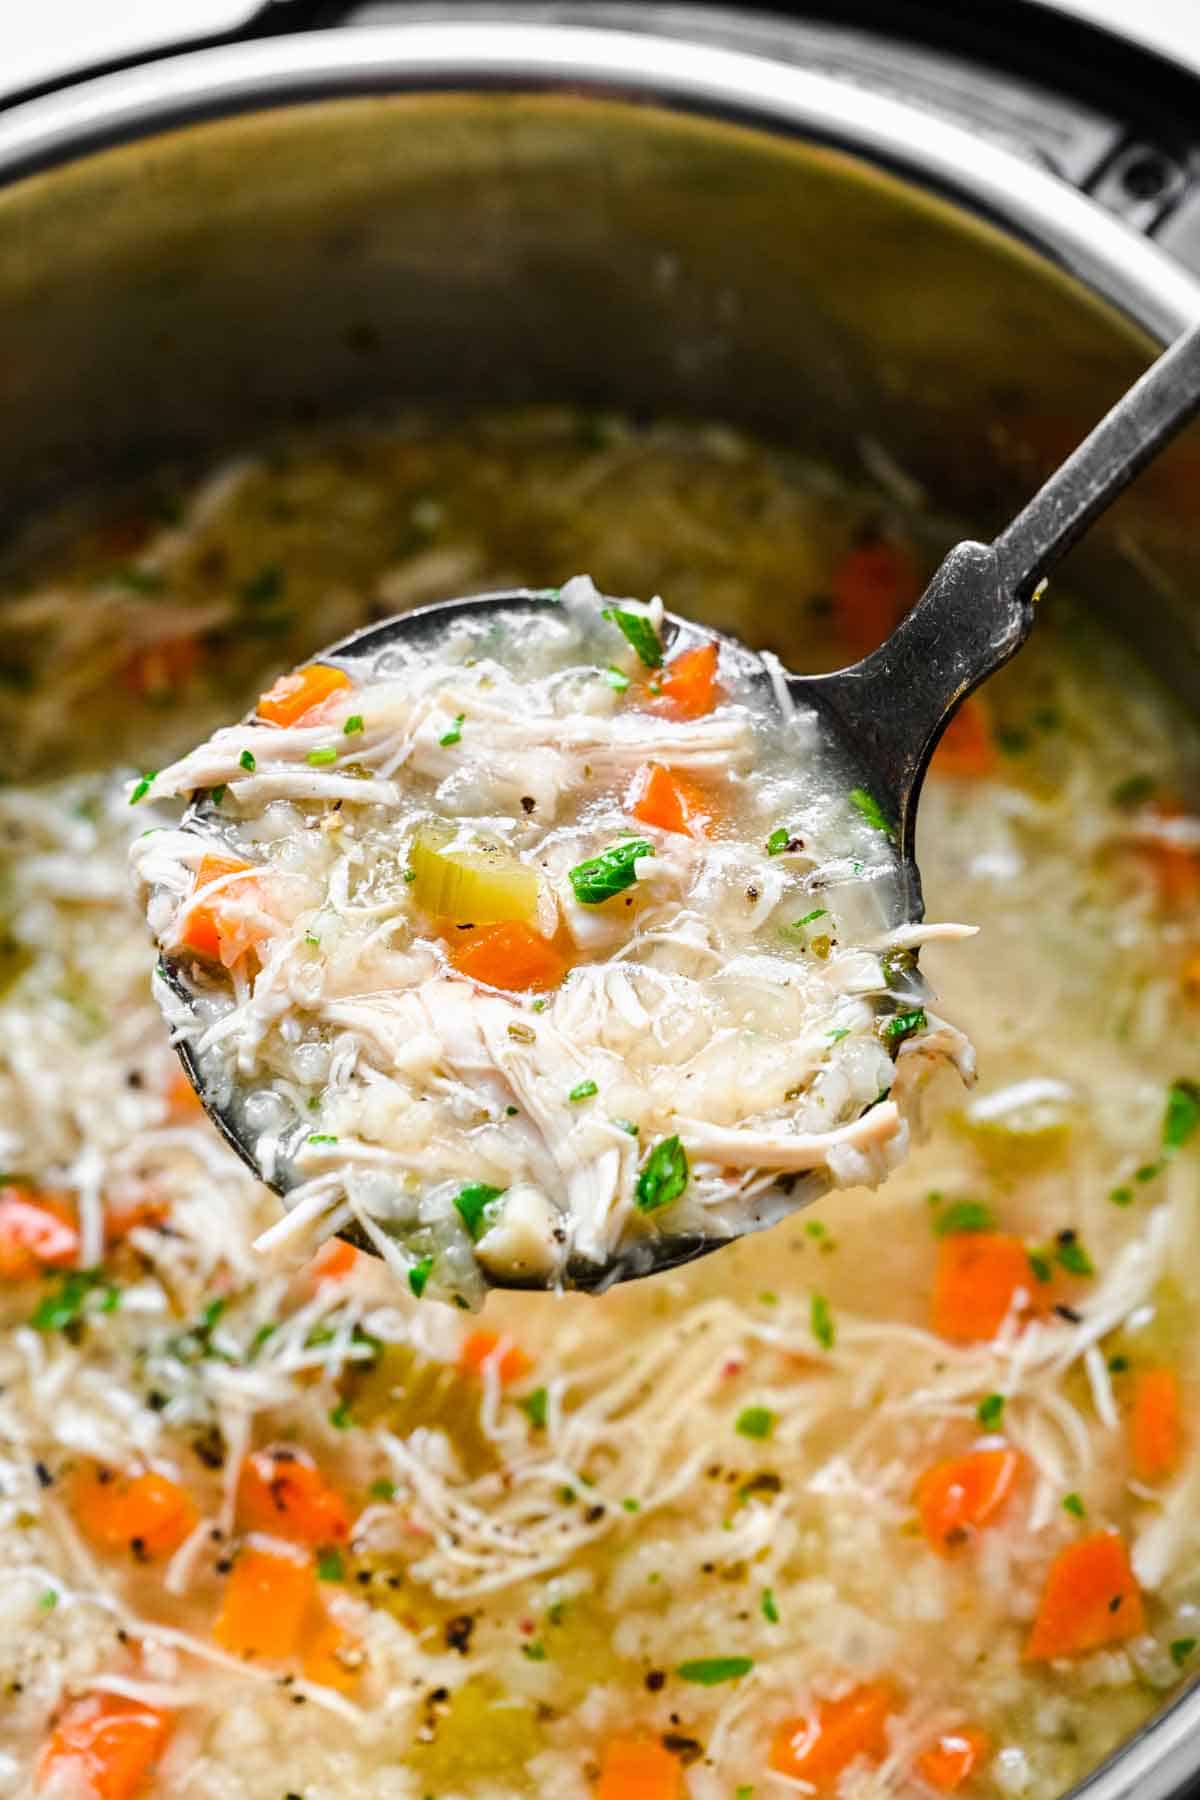 A ladle of chicken and rice soup lifted from the instant pot.